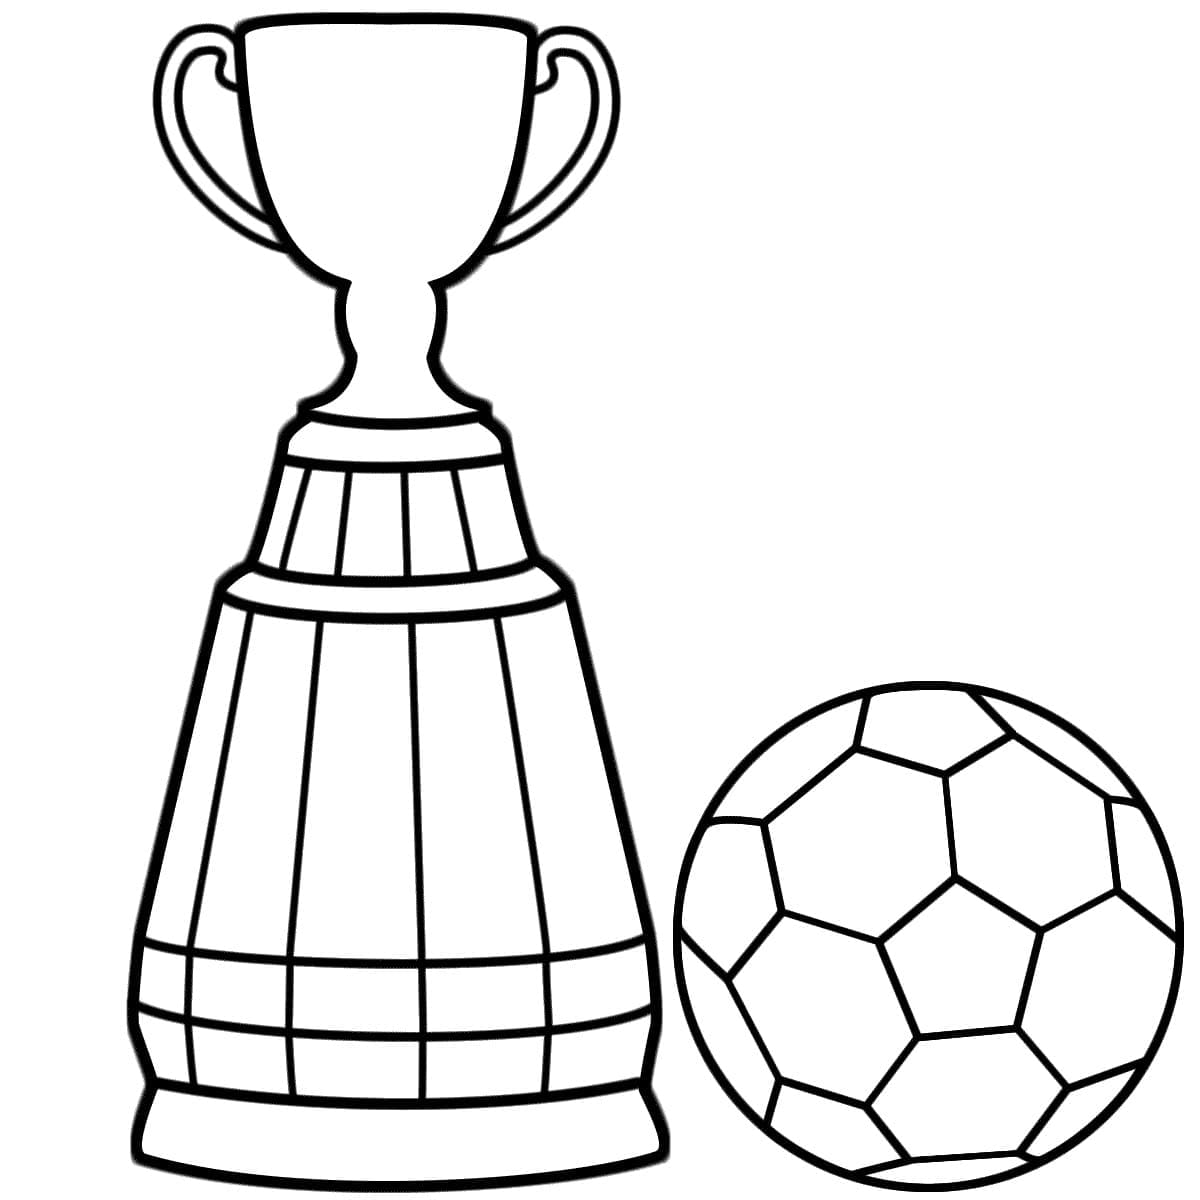 Football trophy and ball coloring page